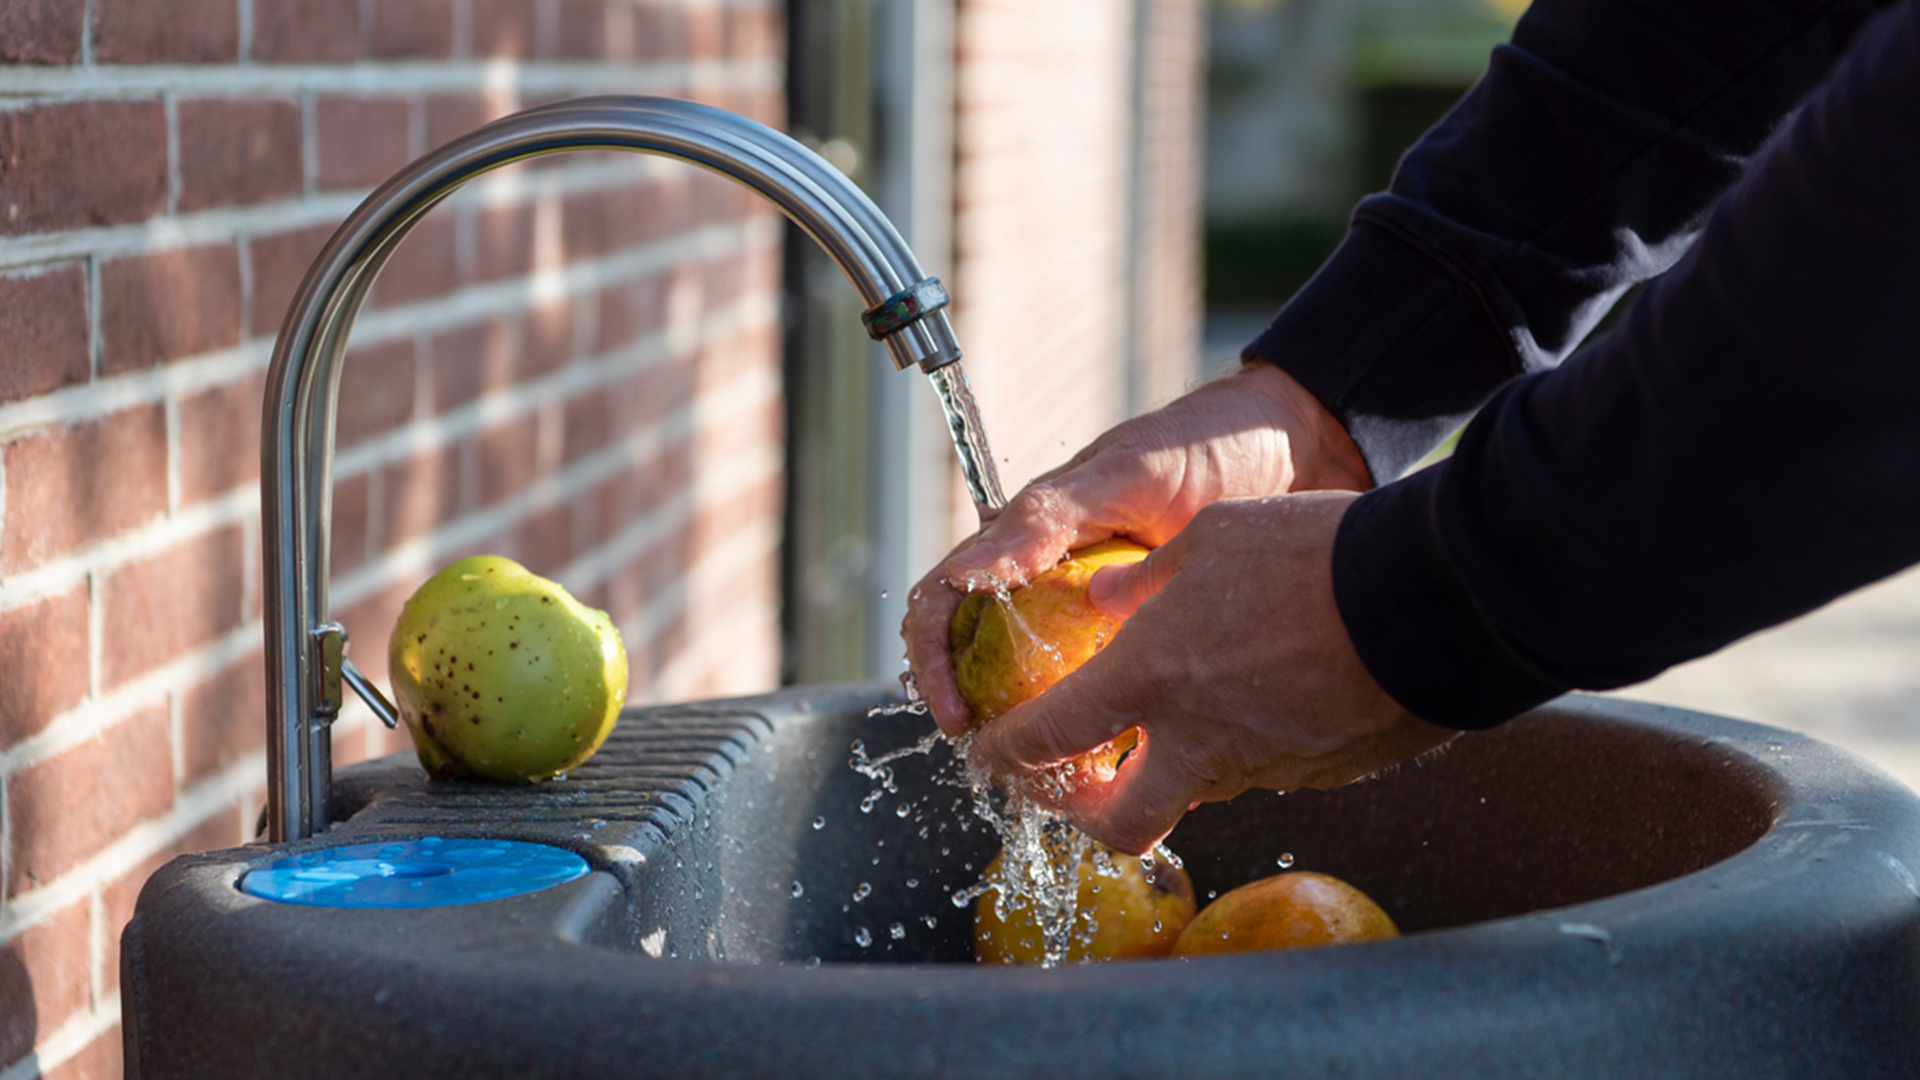 Give your freshly harvested produce a good rinse in the sink. With the optional freshwatertap you always have fresh tapwater available as well. Making sure you never miss out! More importantly it encourages you to make sustainable water choice a part of your daily routines.